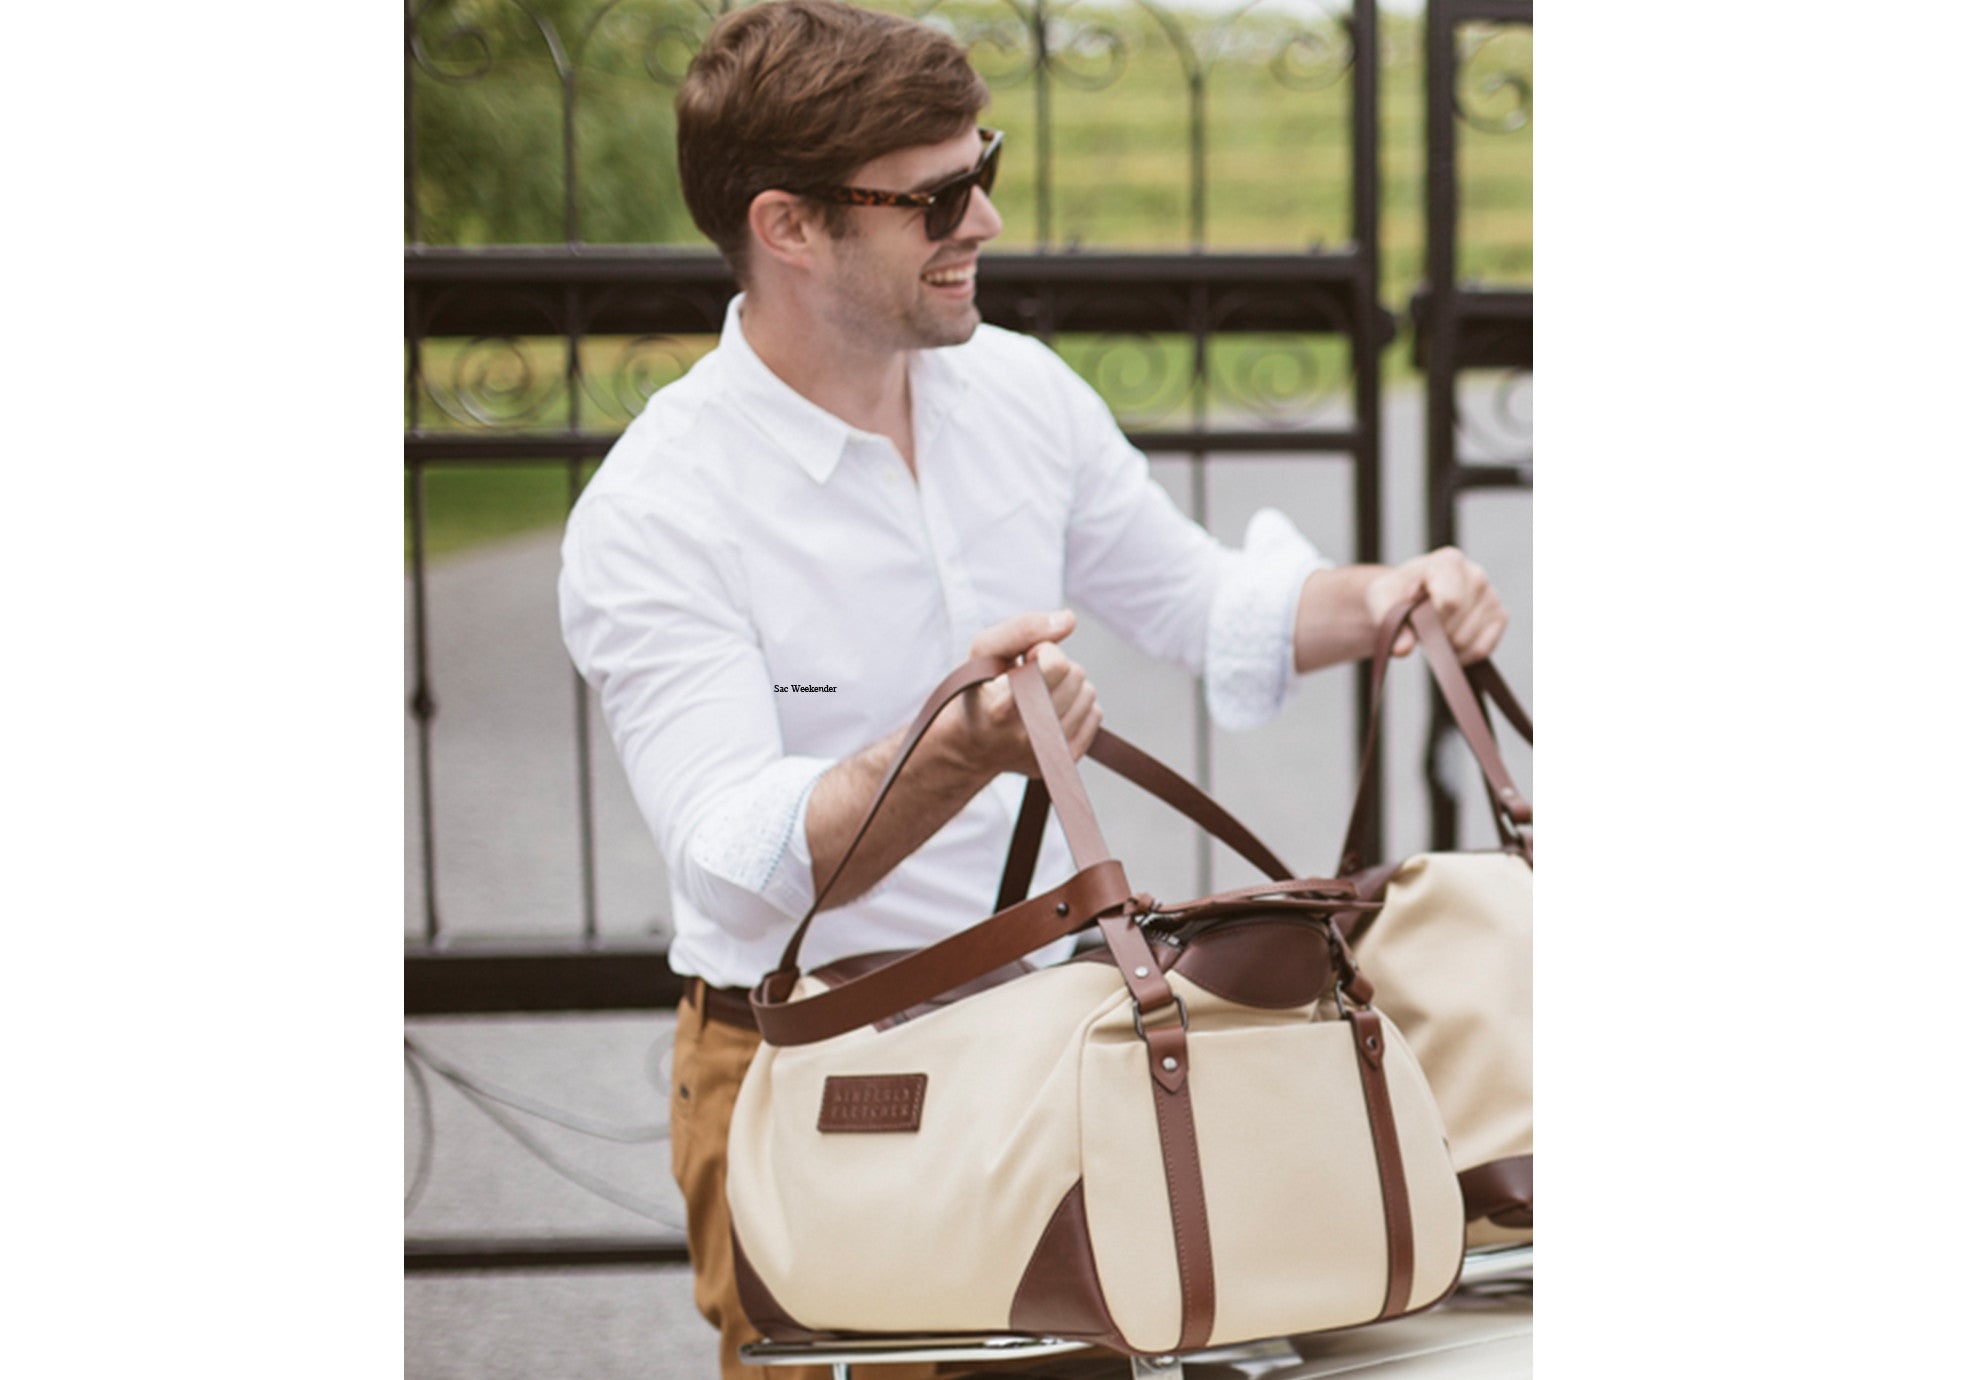 luxury canadian leather and canvas travel bag handmade in Mtl Canada qc